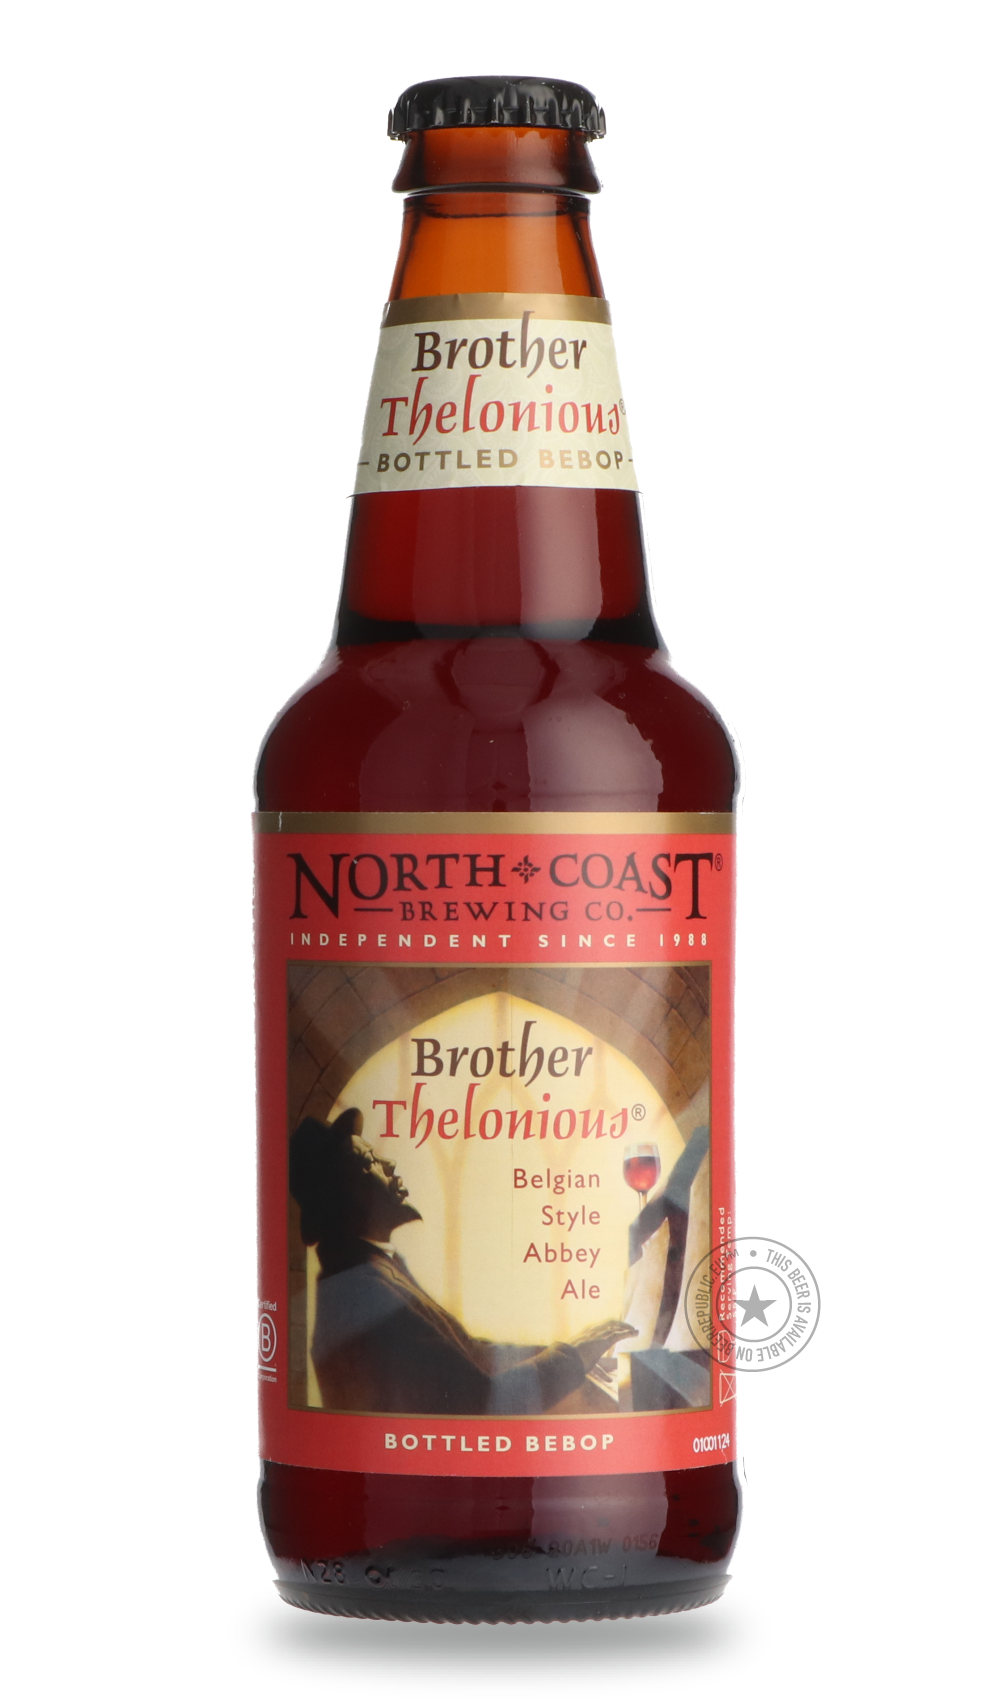 -North Coast- Brother Thelonious-Brown & Dark- Only @ Beer Republic - The best online beer store for American & Canadian craft beer - Buy beer online from the USA and Canada - Bier online kopen - Amerikaans bier kopen - Craft beer store - Craft beer kopen - Amerikanisch bier kaufen - Bier online kaufen - Acheter biere online - IPA - Stout - Porter - New England IPA - Hazy IPA - Imperial Stout - Barrel Aged - Barrel Aged Imperial Stout - Brown - Dark beer - Blond - Blonde - Pilsner - Lager - Wheat - Weizen -